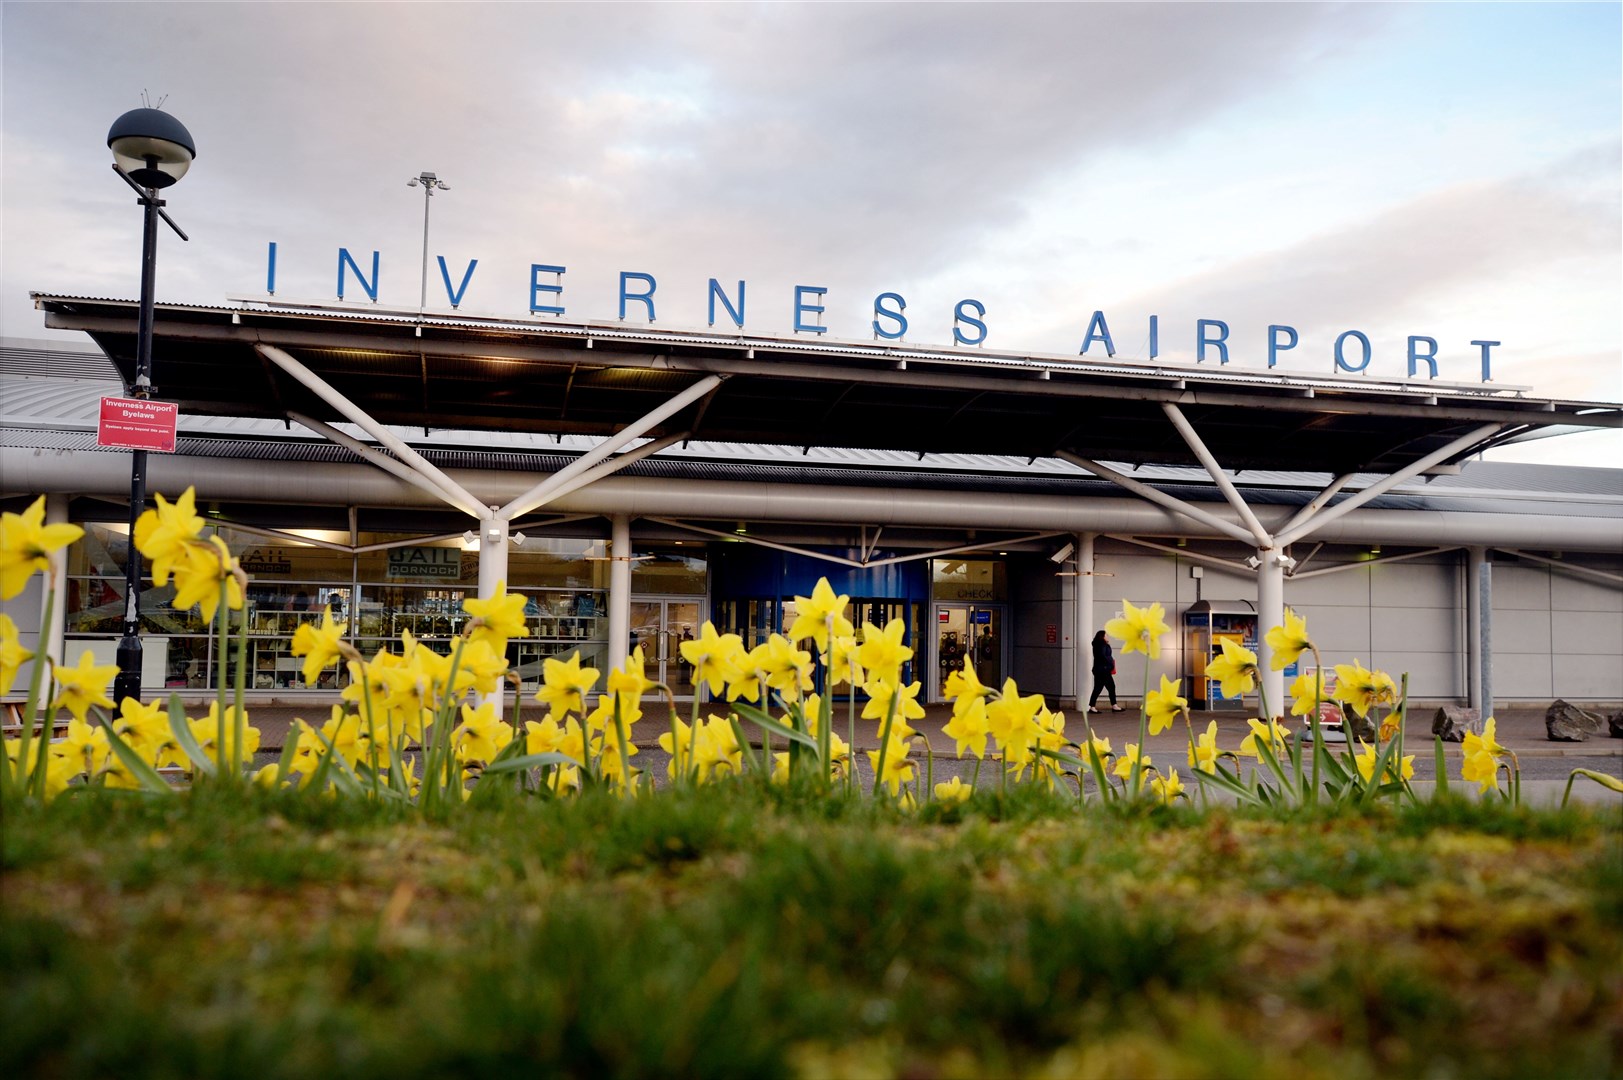 Planes are set to be grounded at Inverness Airport on Thursday as air traffic controllers strike.